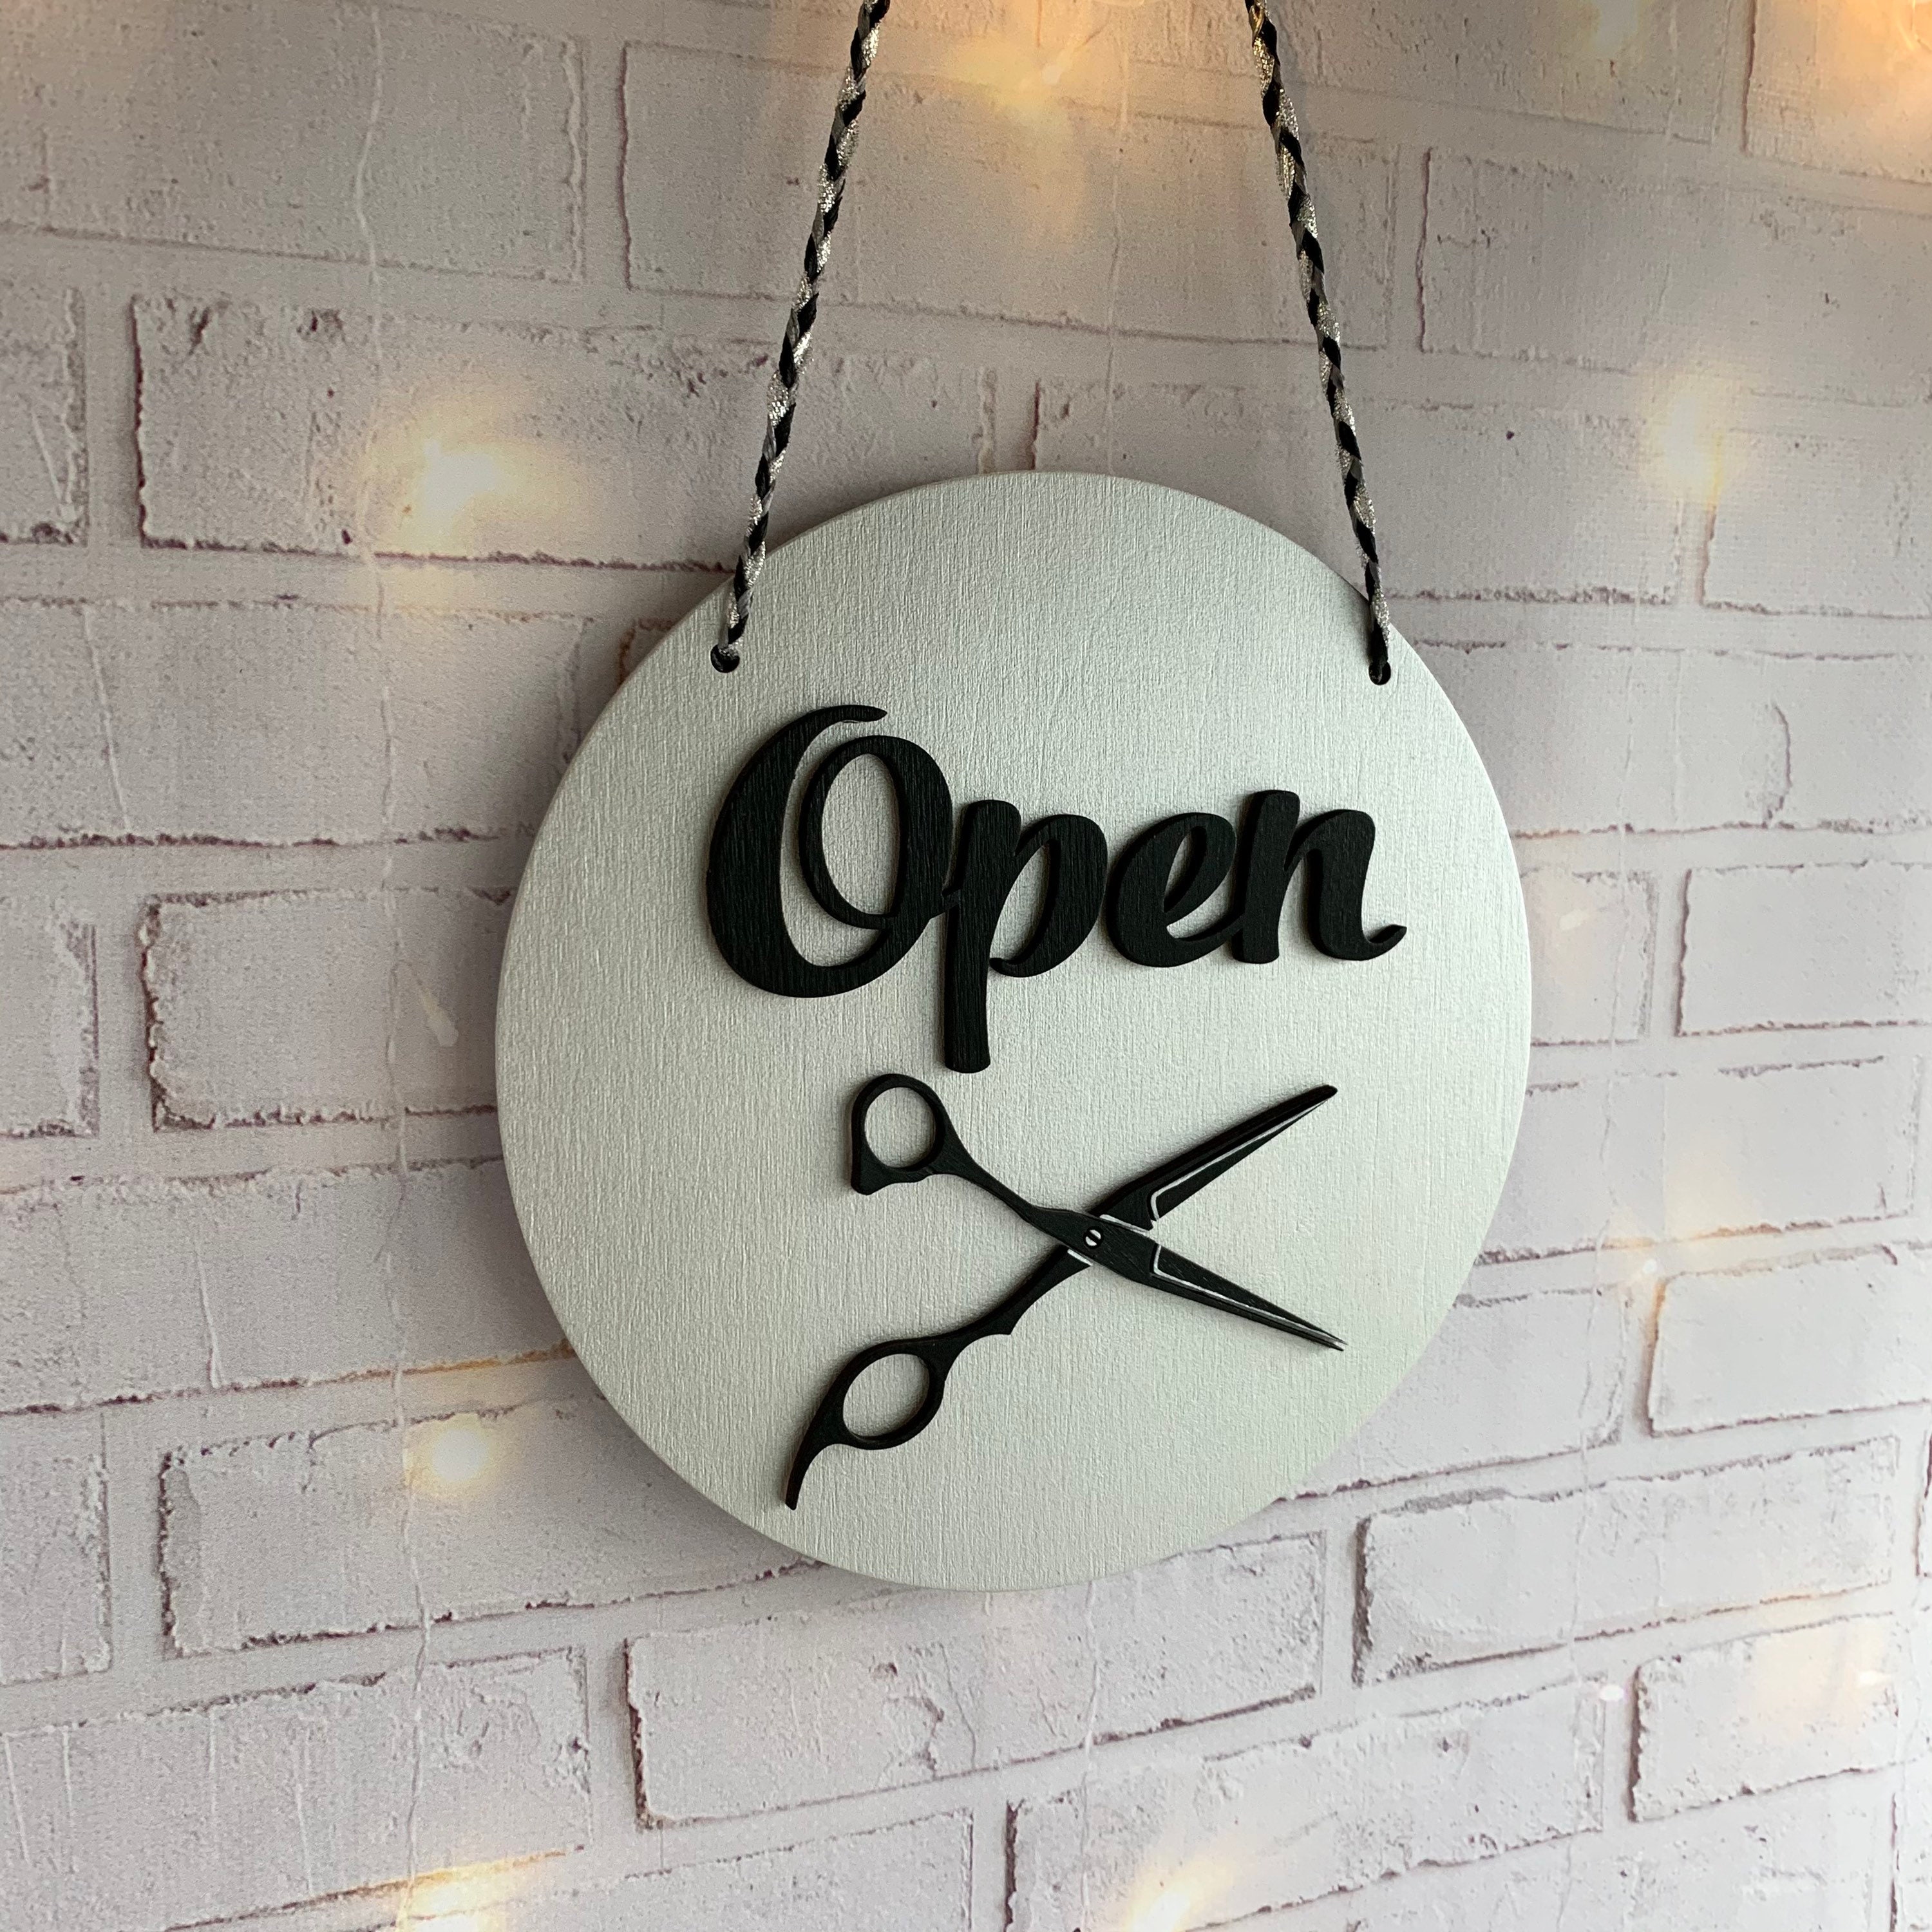 Hair Salon Open Closed Sign With Scissors Business Sign - Etsy